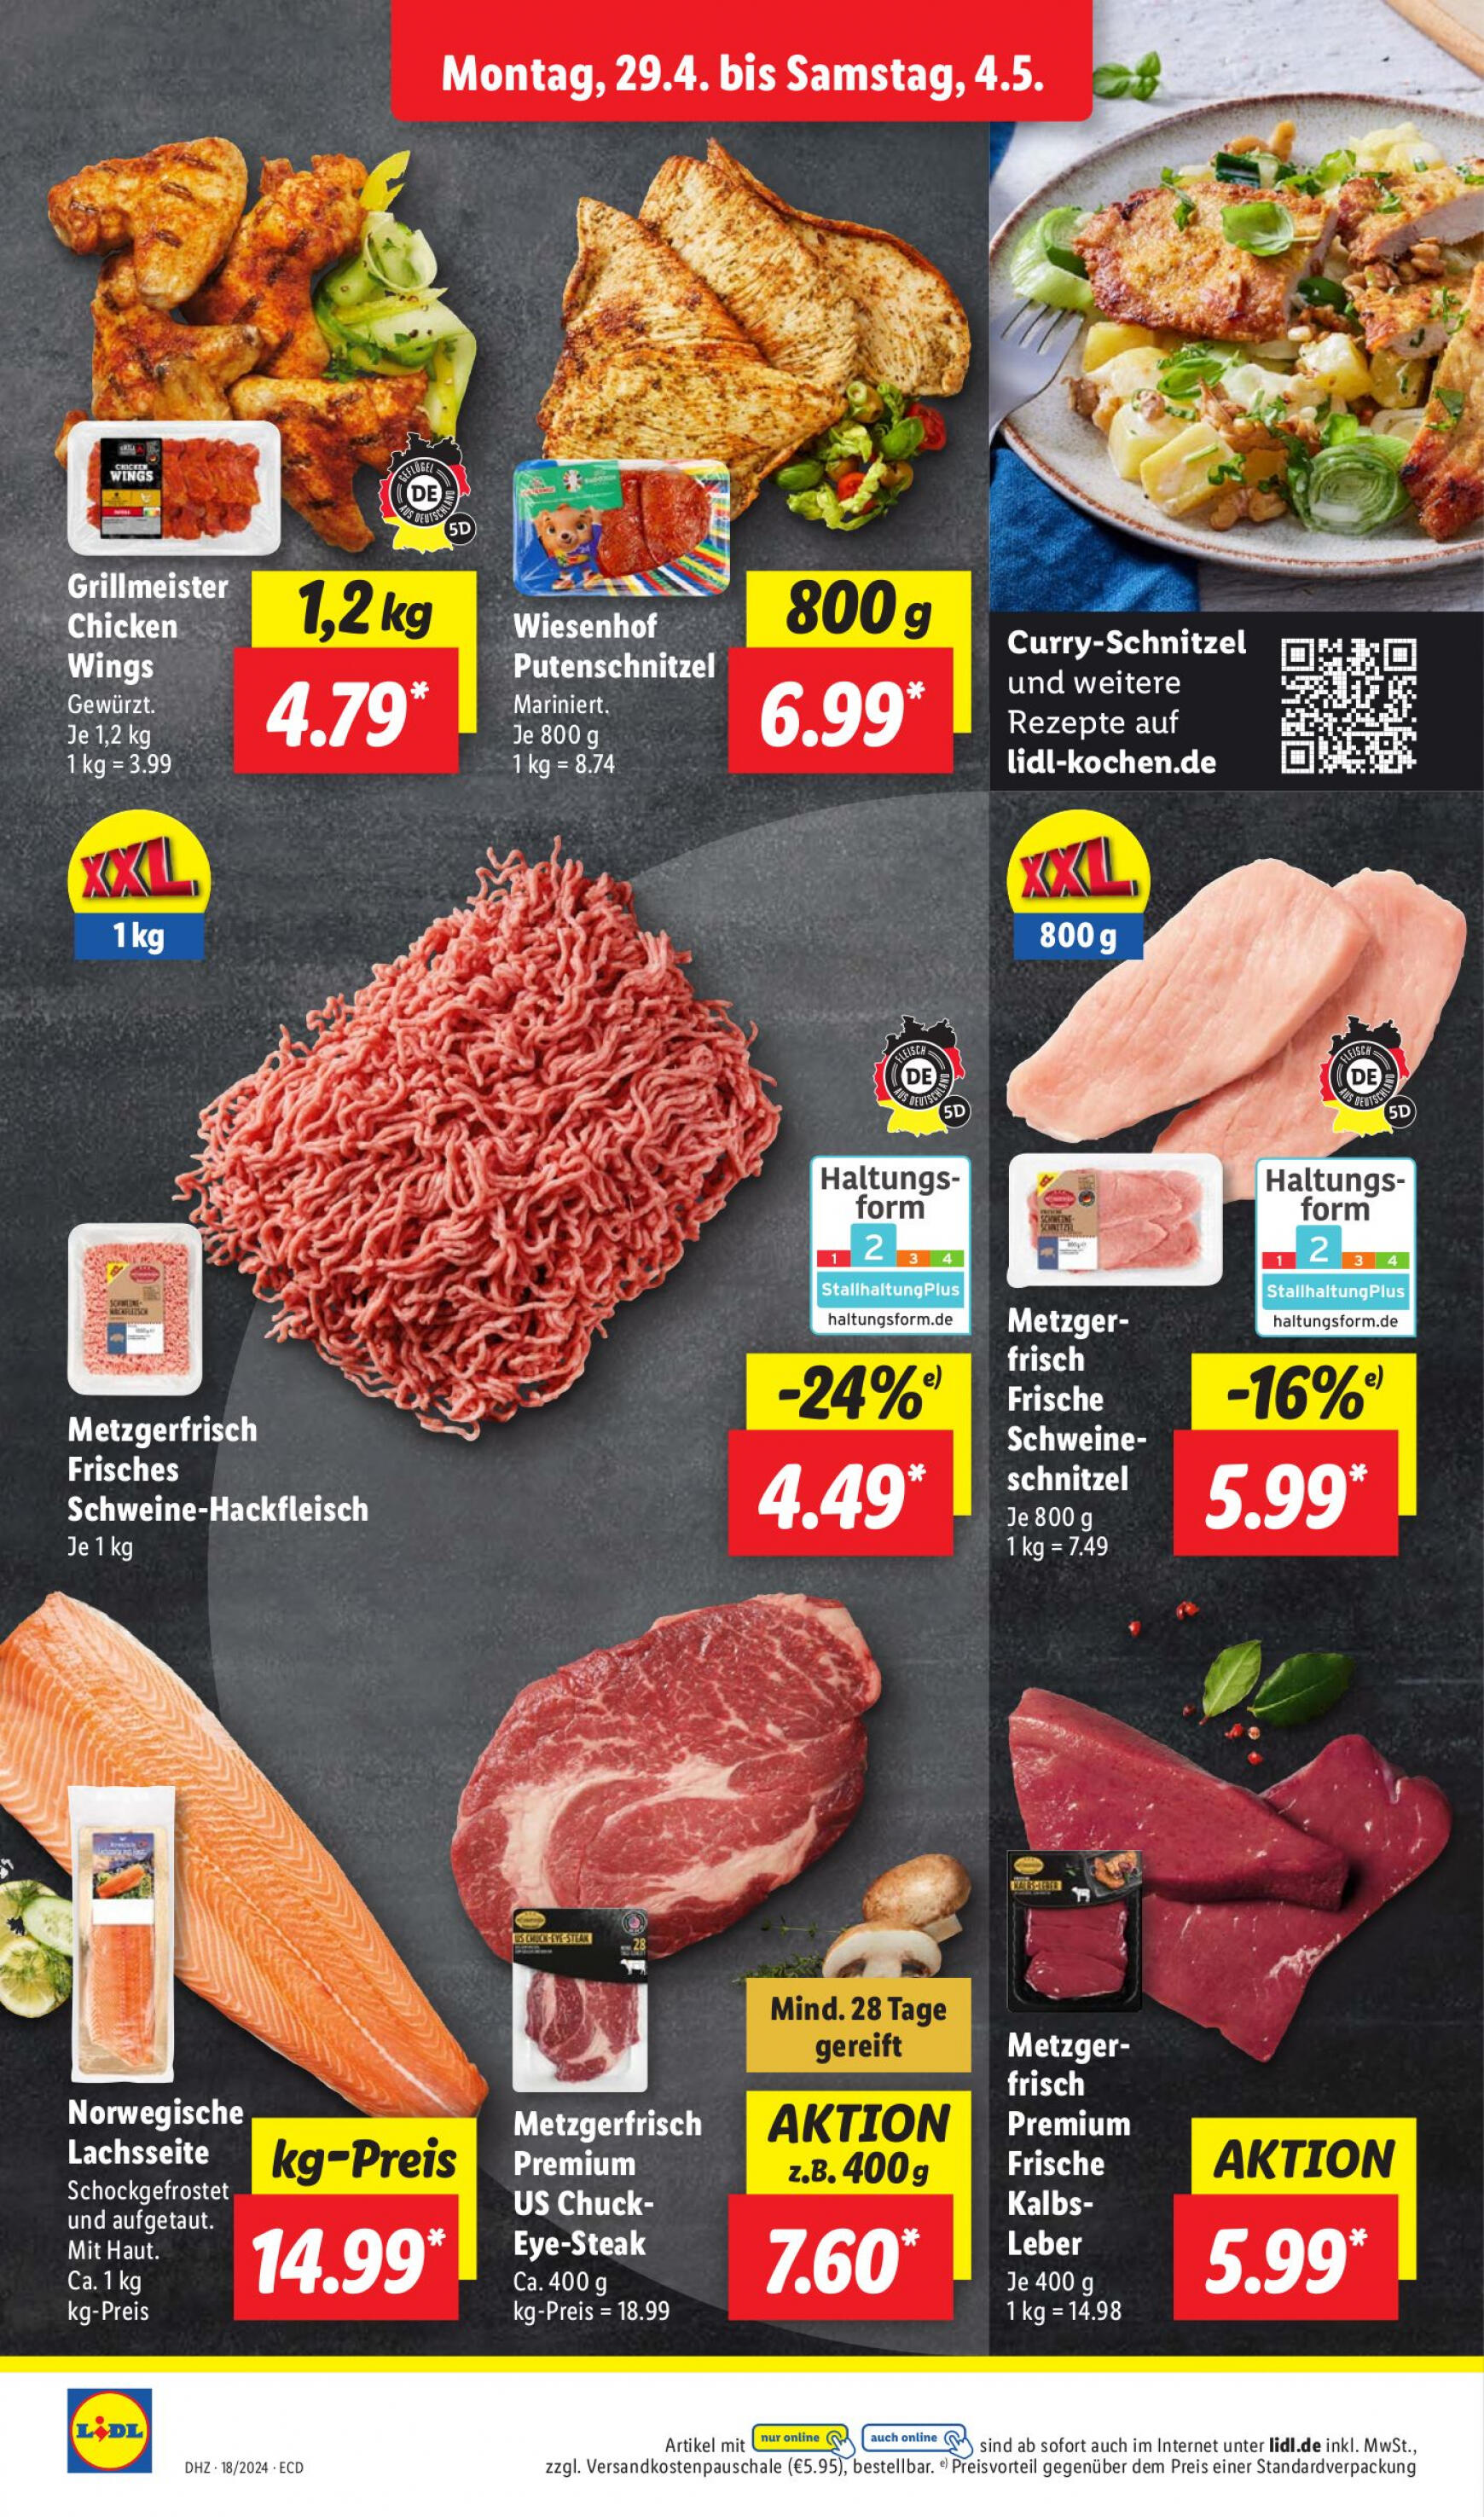 lidl - Flyer Lidl aktuell 29.04. - 04.05. - page: 10